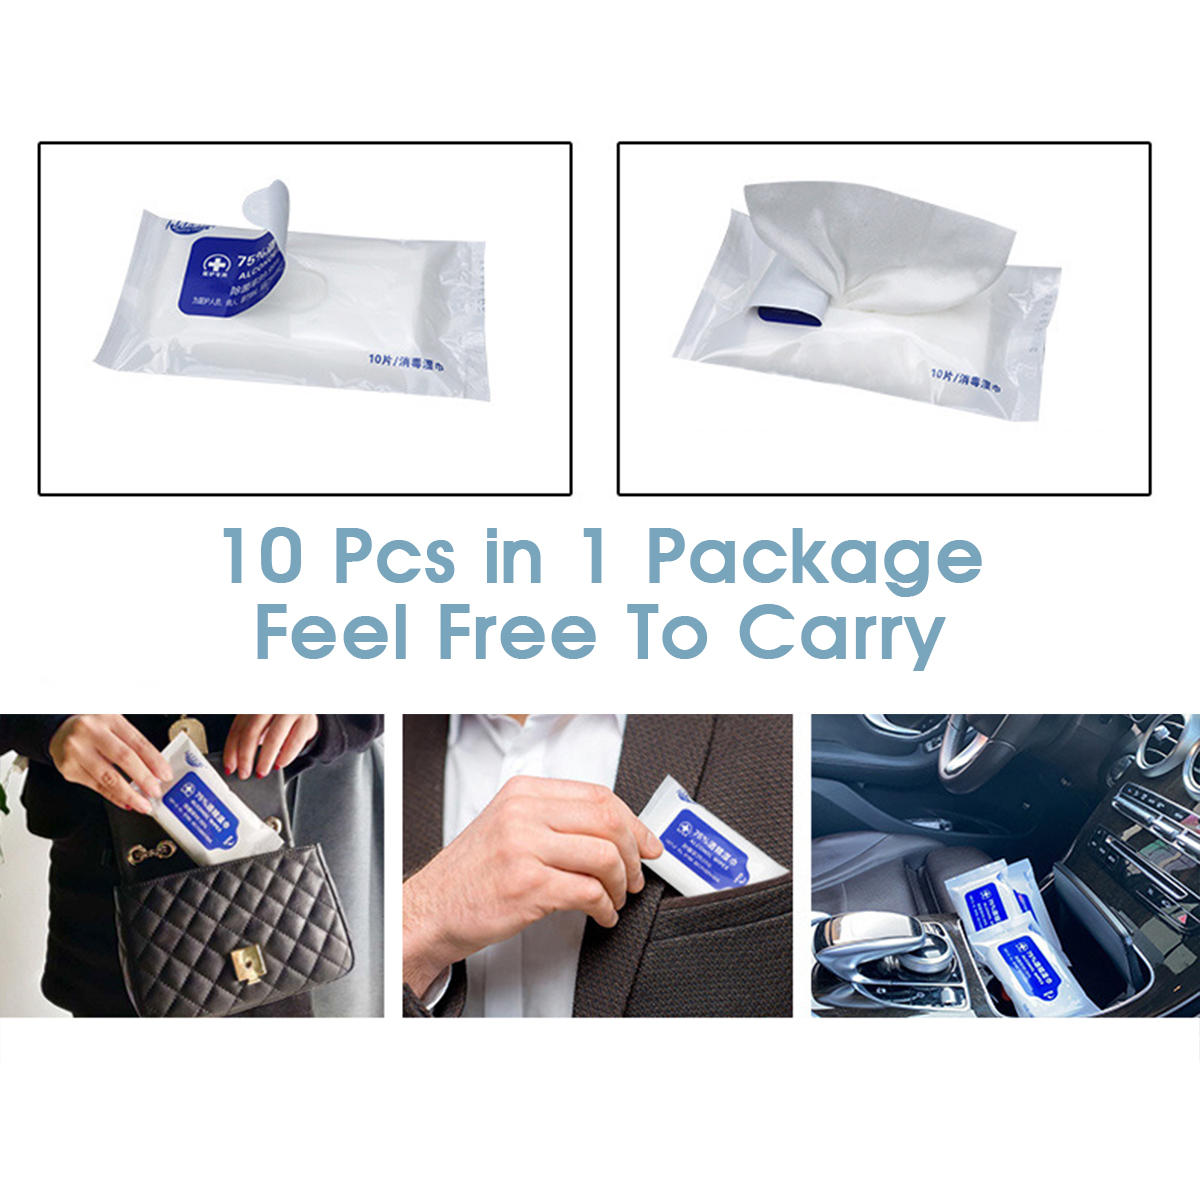 10Pcs-75-Rubbing-Alcohol-Wipes-Outdoor-Portable-Disposable-Skin-Sterilization-Pads-Cleaning-Wet-Wipe-1668570-5